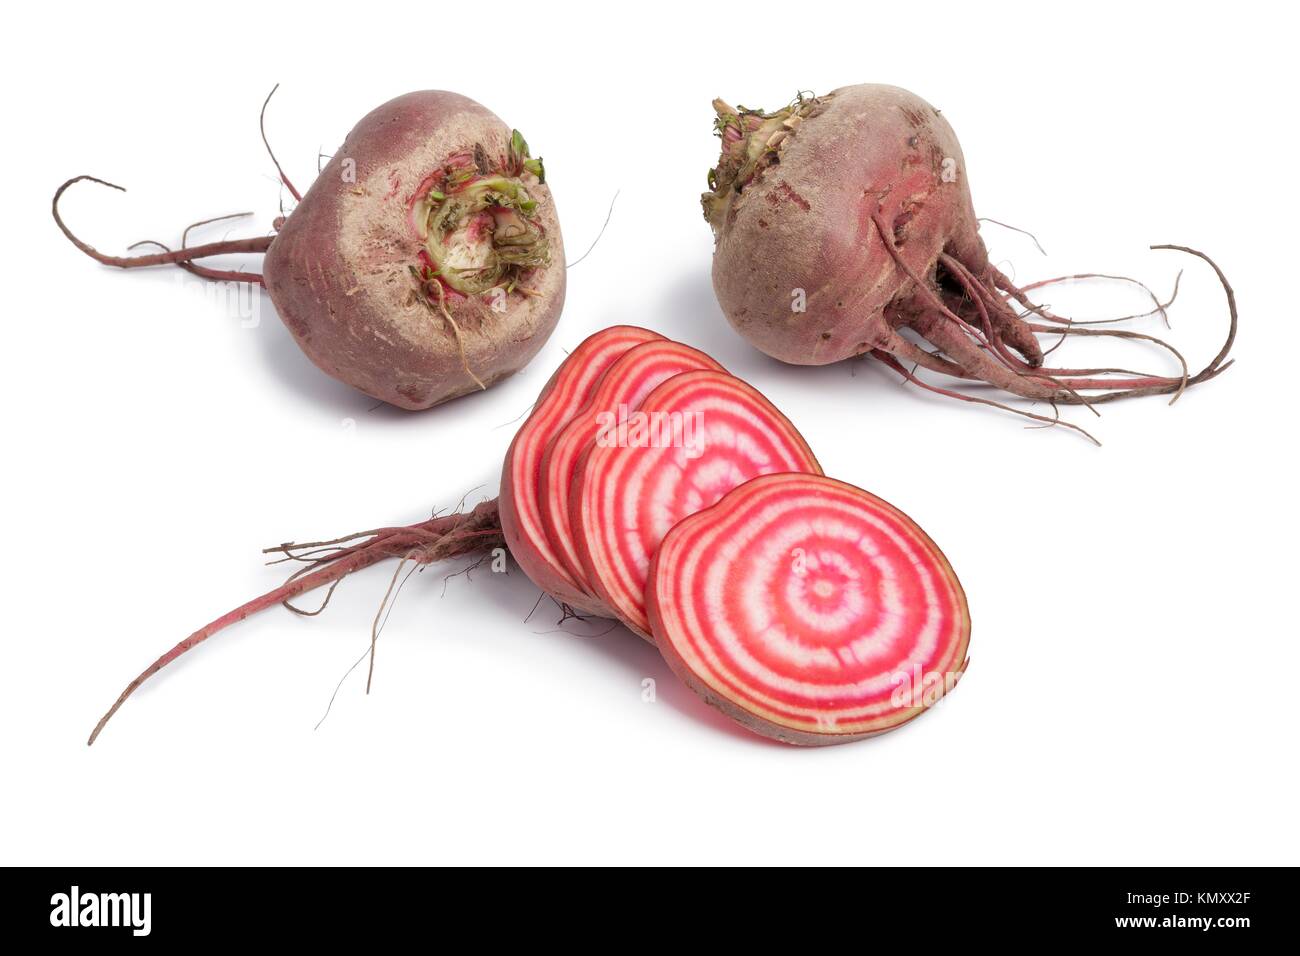 Whole chioggia beets and slices on white background Stock Photo